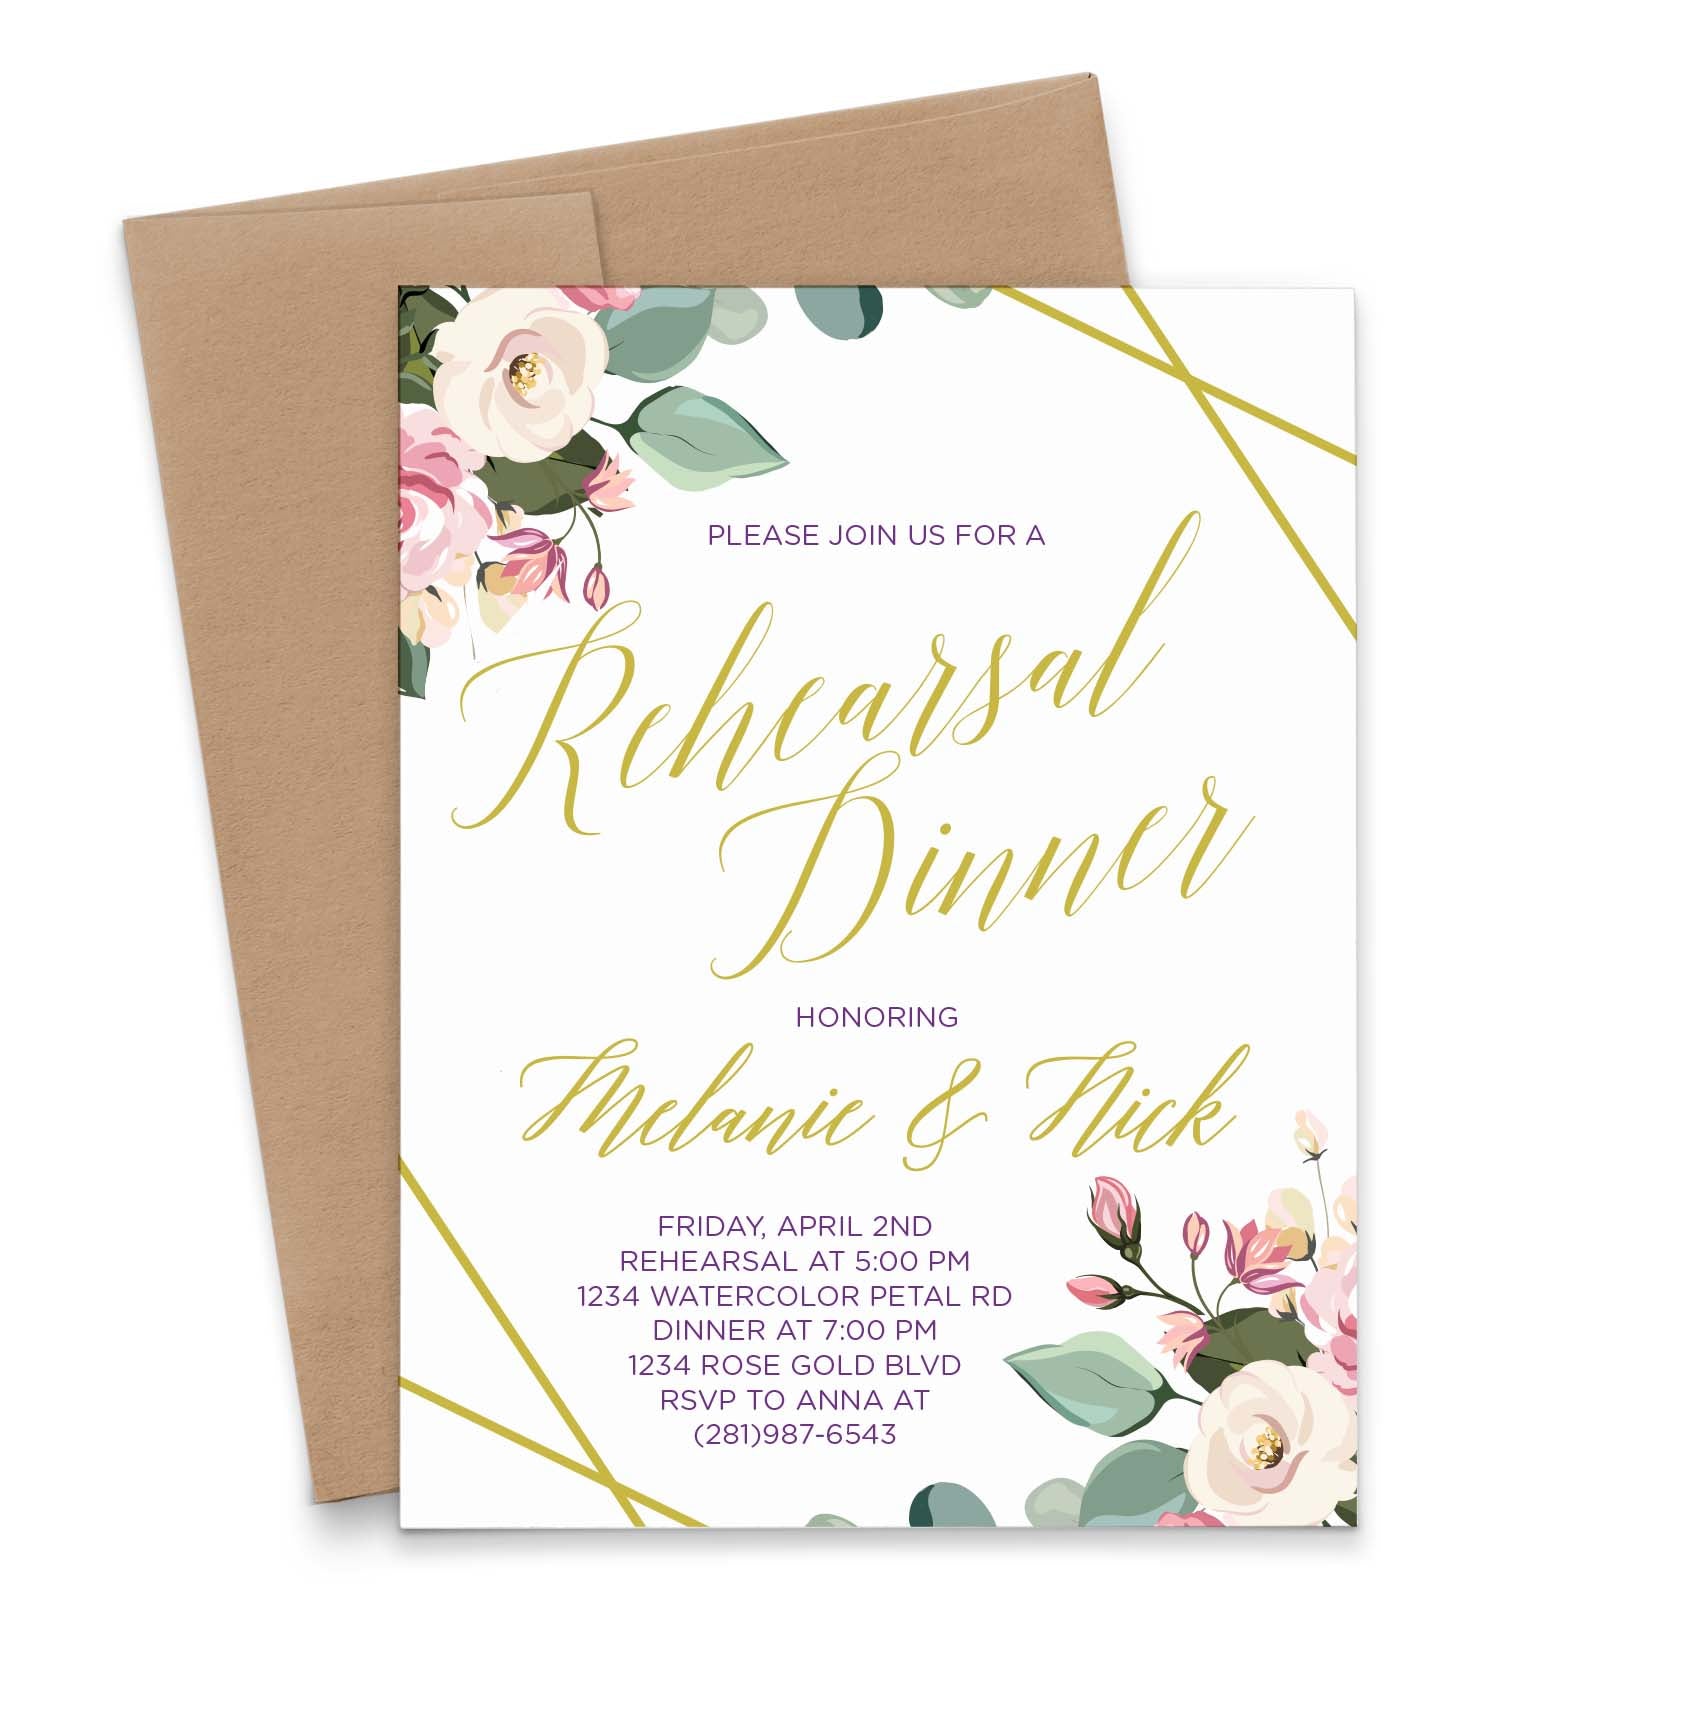 Rehearsal And Dinner Invitations